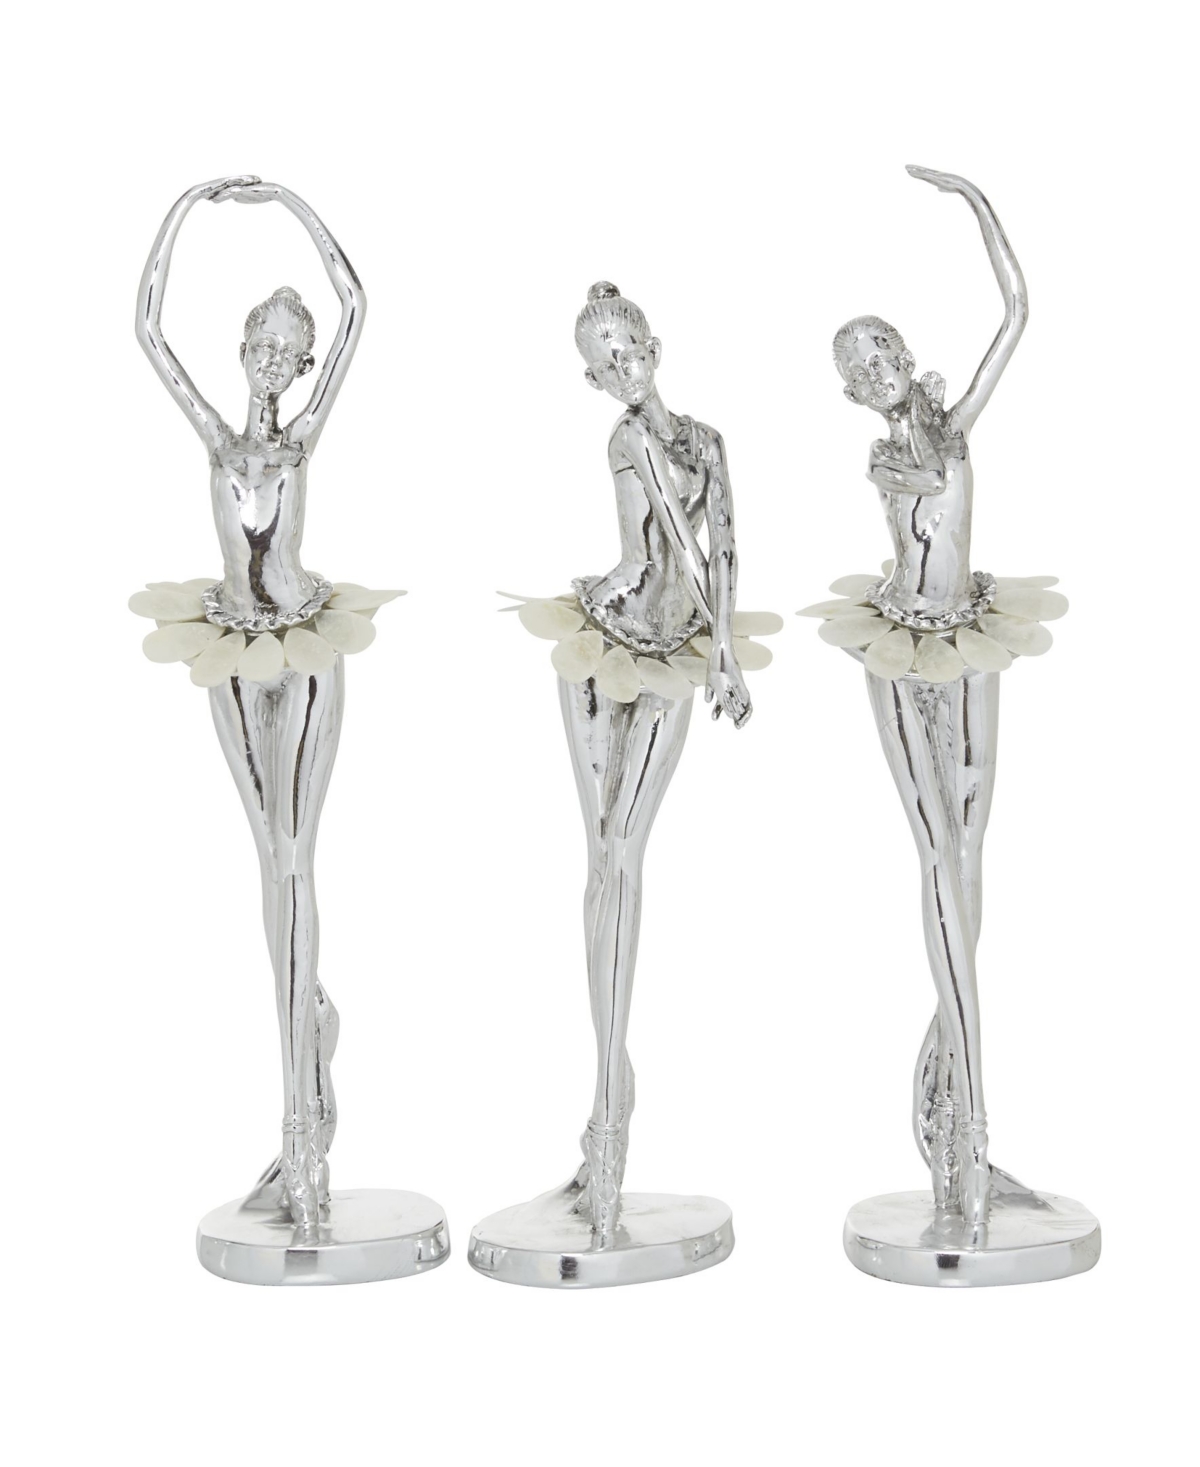 Rosemary Lane Glam Dancer Sculpture, Set Of 3 In Silver-tone